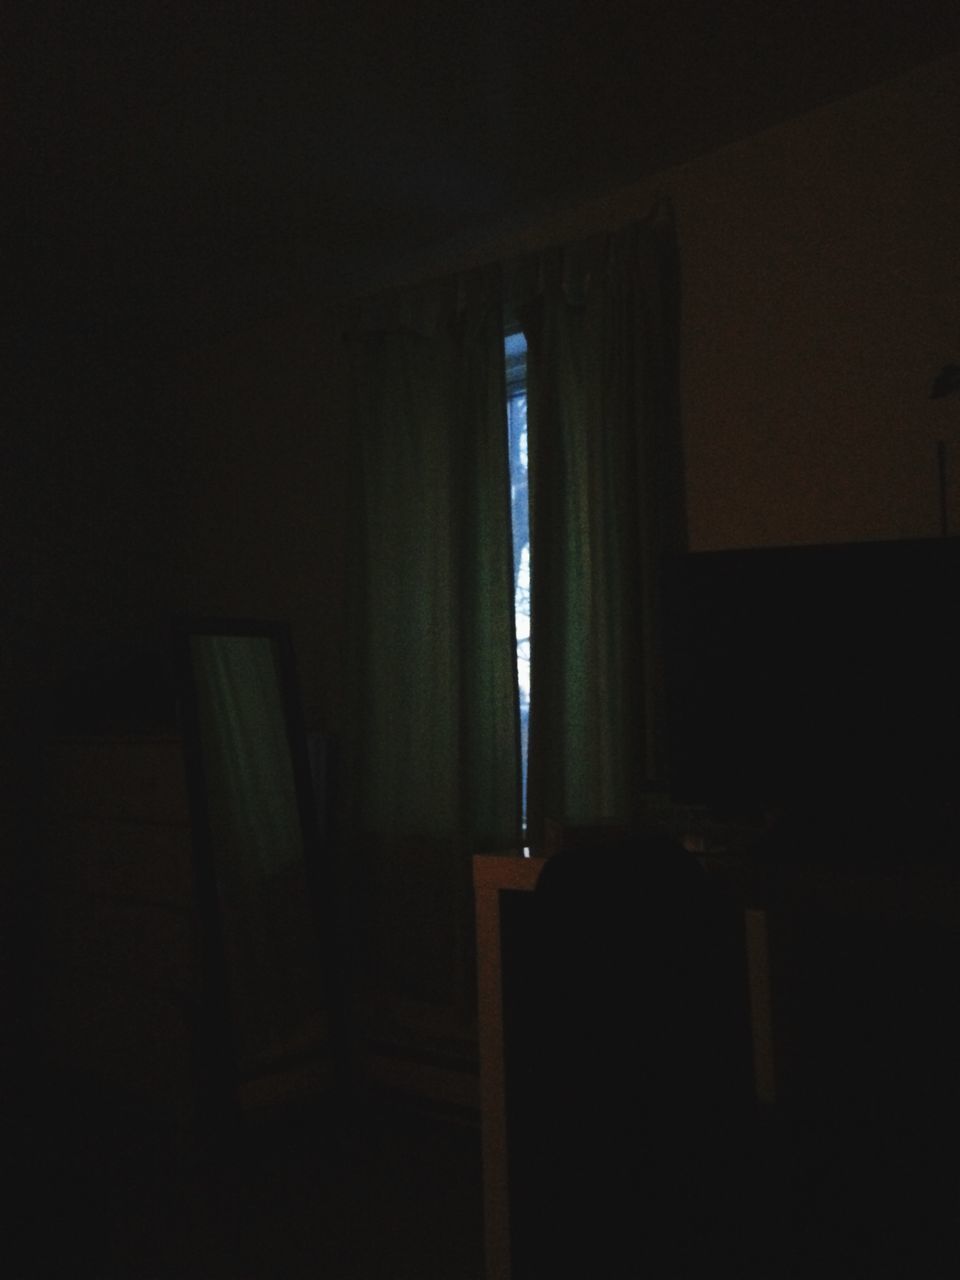 indoors, window, architecture, built structure, dark, home interior, house, wall - building feature, no people, curtain, illuminated, room, shadow, wall, sunlight, copy space, absence, light - natural phenomenon, darkroom, empty